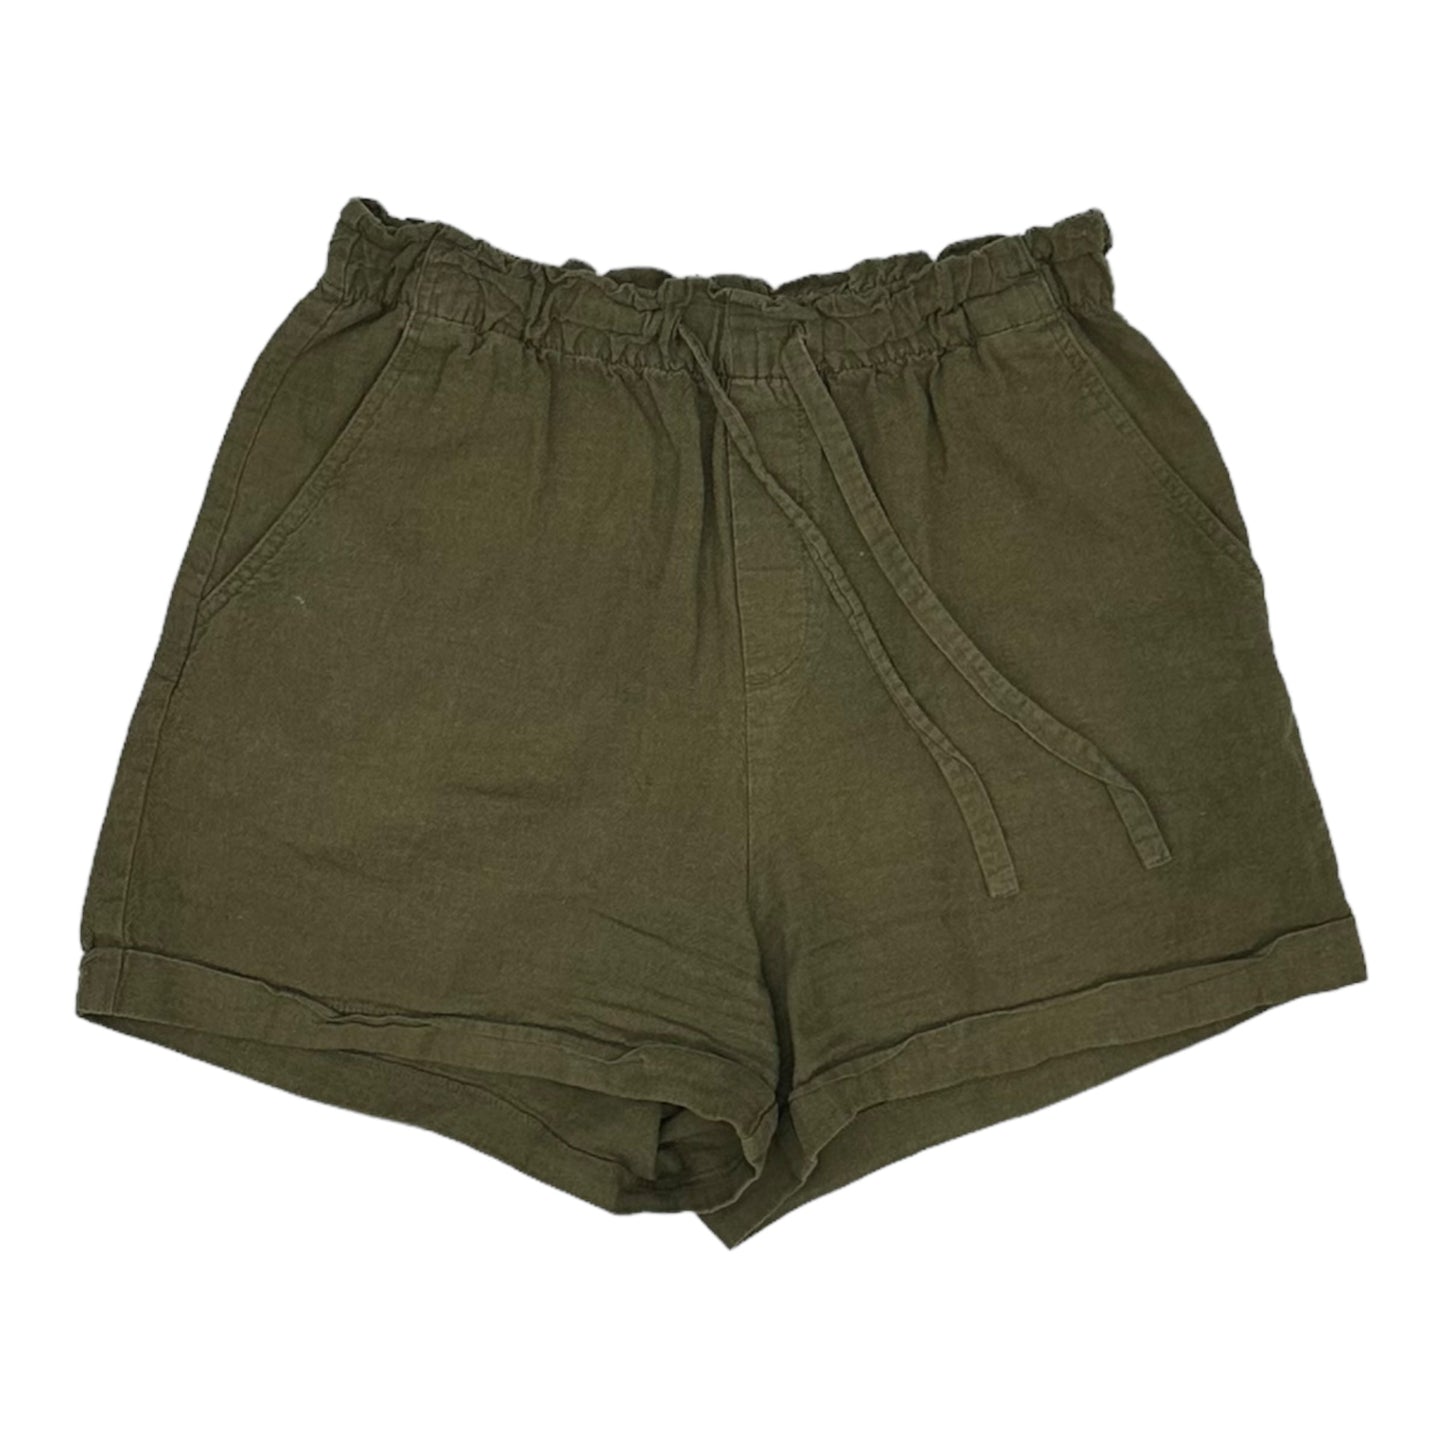 Shorts By Uniqlo  Size: S